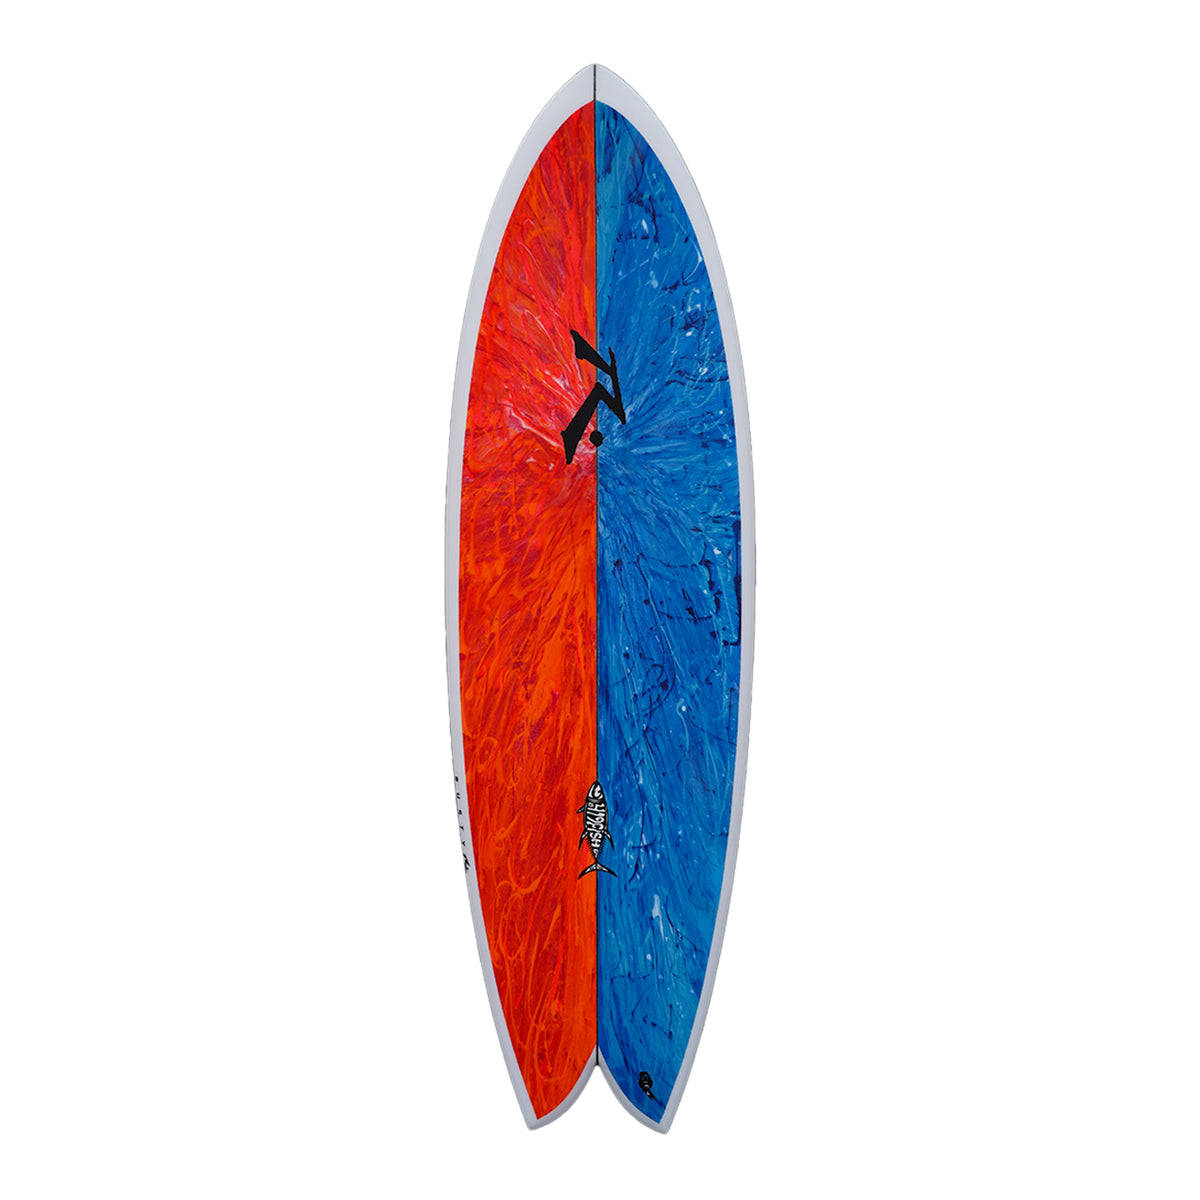 419fish - Alternative - Rusty Surfboards - Top View - Red and Blue Halves